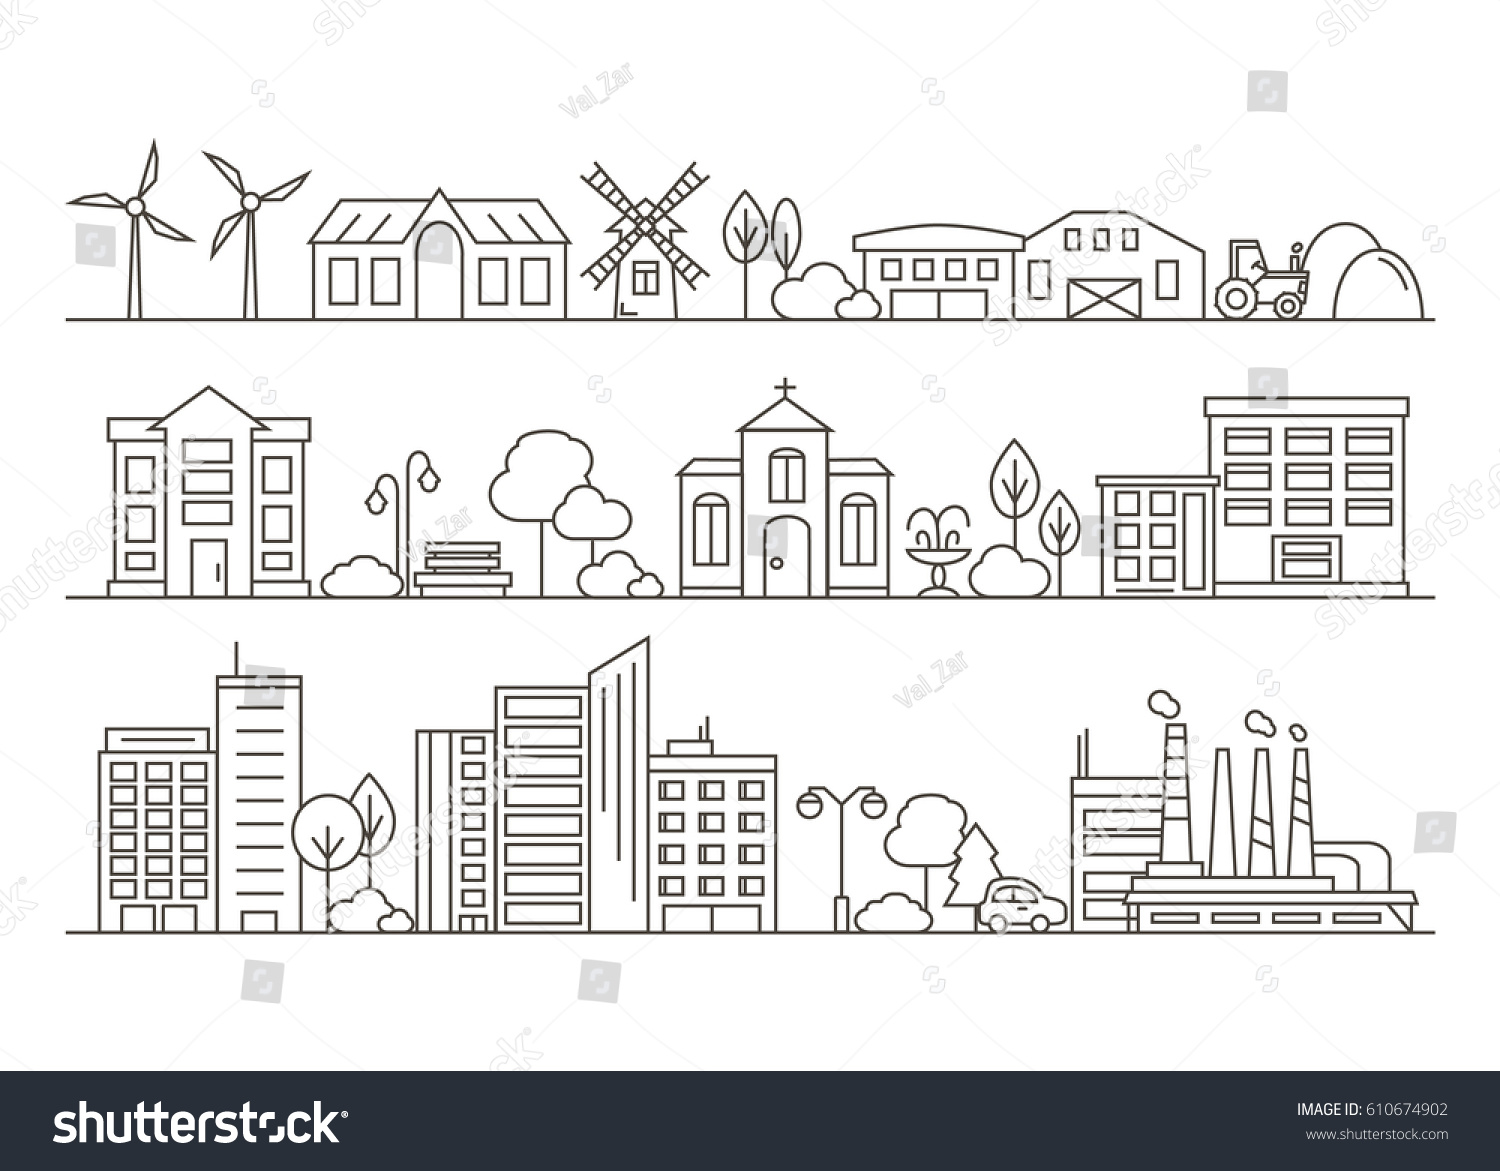 Vector City, Town and Countryside Illustration in Linear Style - buildings, skyscraper, church, park, factory, barn, mill, tractor and trees. Thin line art icons. #610674902